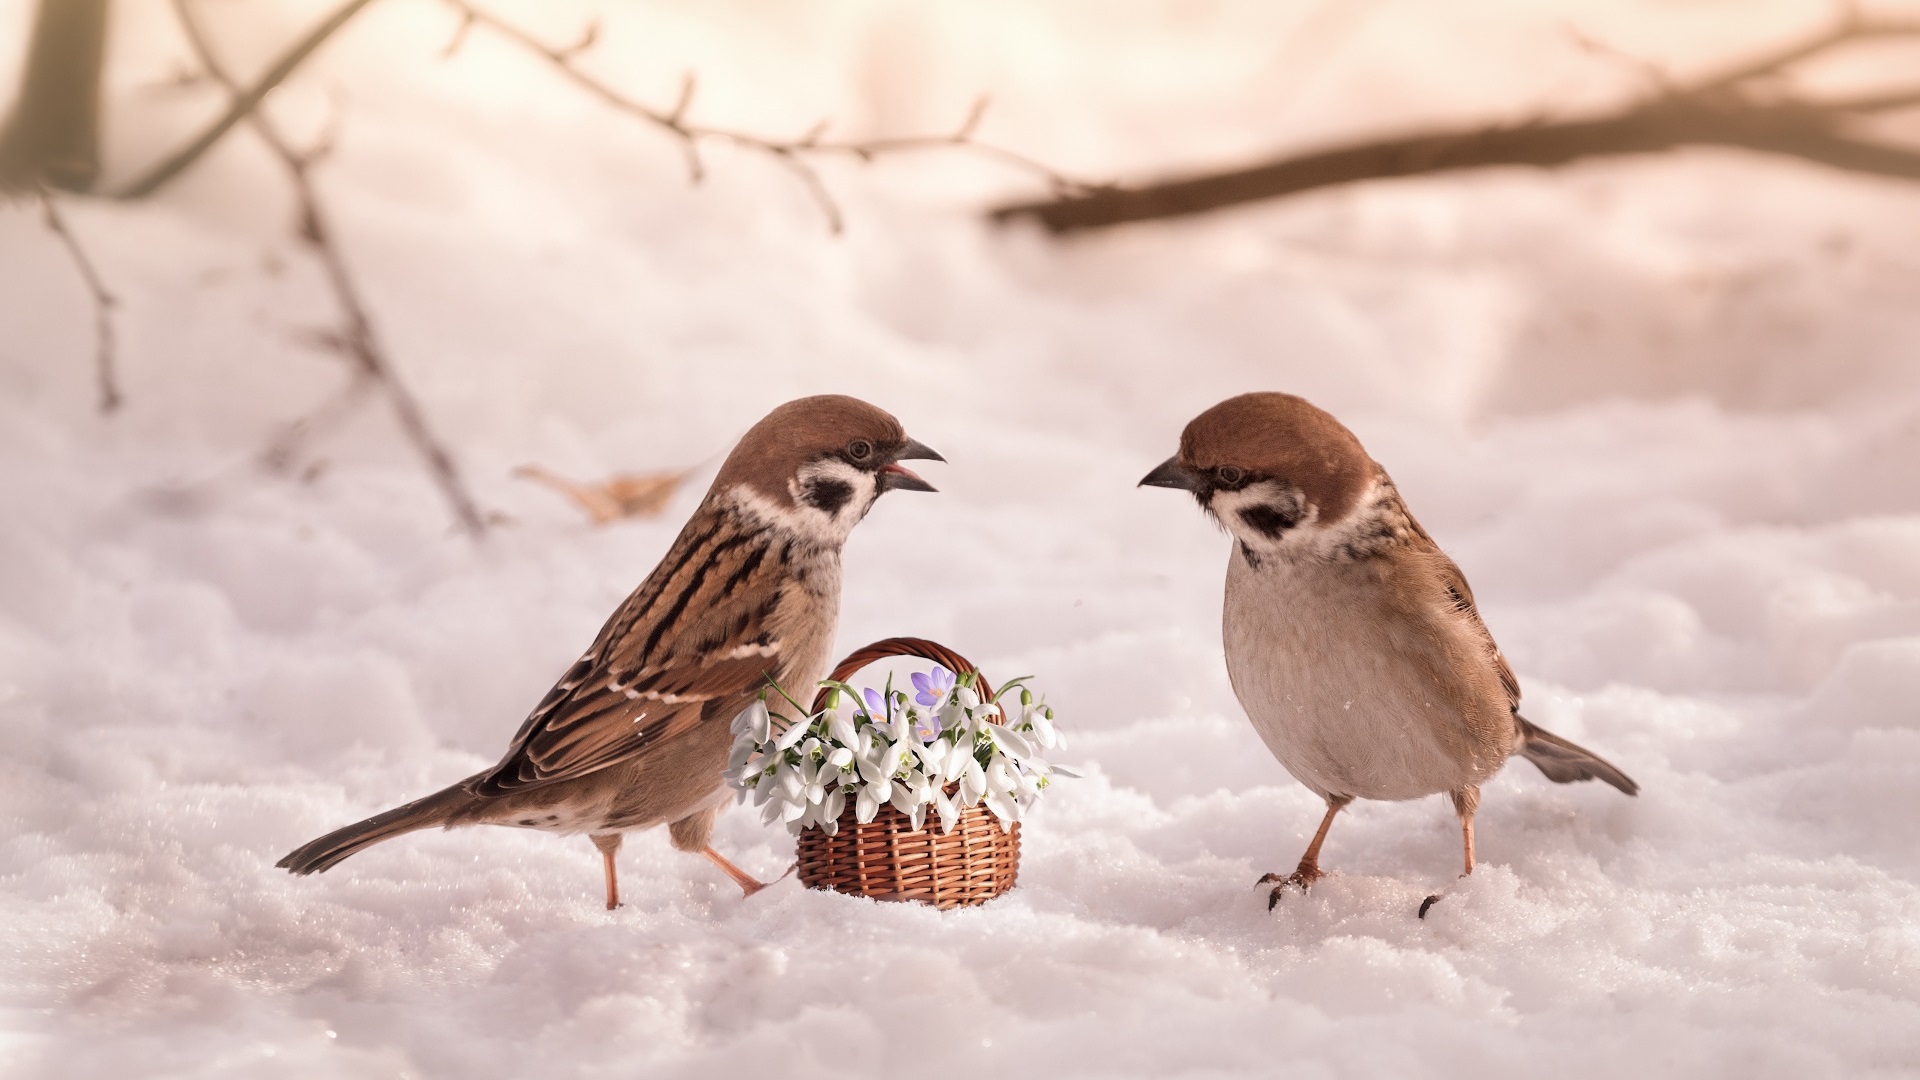 Two-sparrows-snow-flowers_1920x1080.jpg